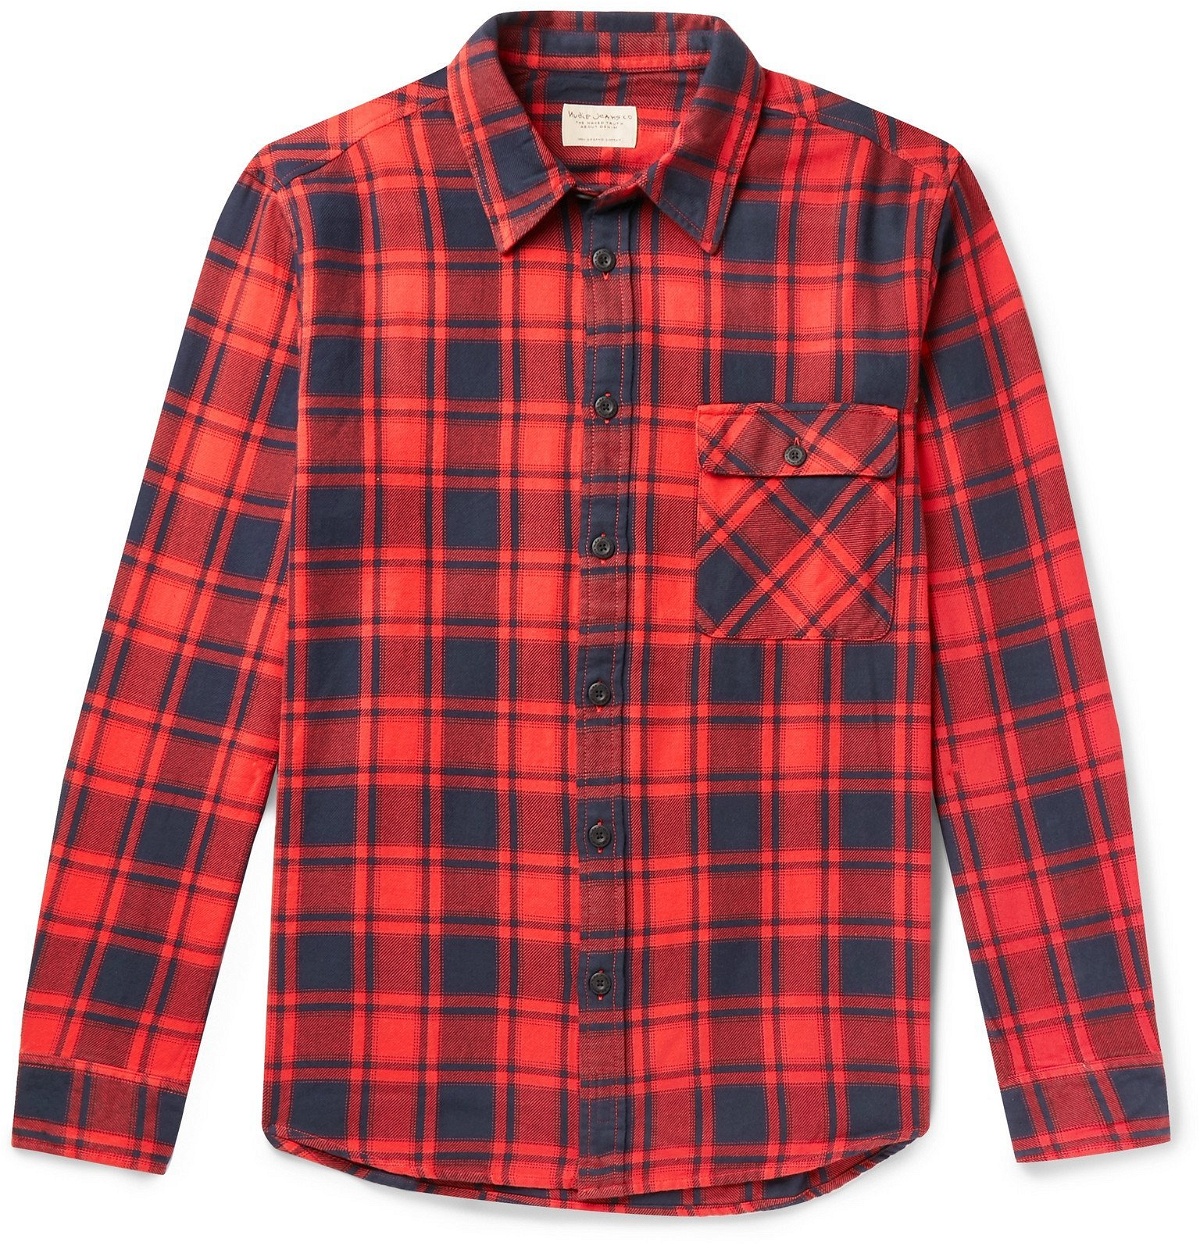 Nudie Jeans - Sten Checked Cotton-Flannel Shirt - Red Nudie Jeans Co